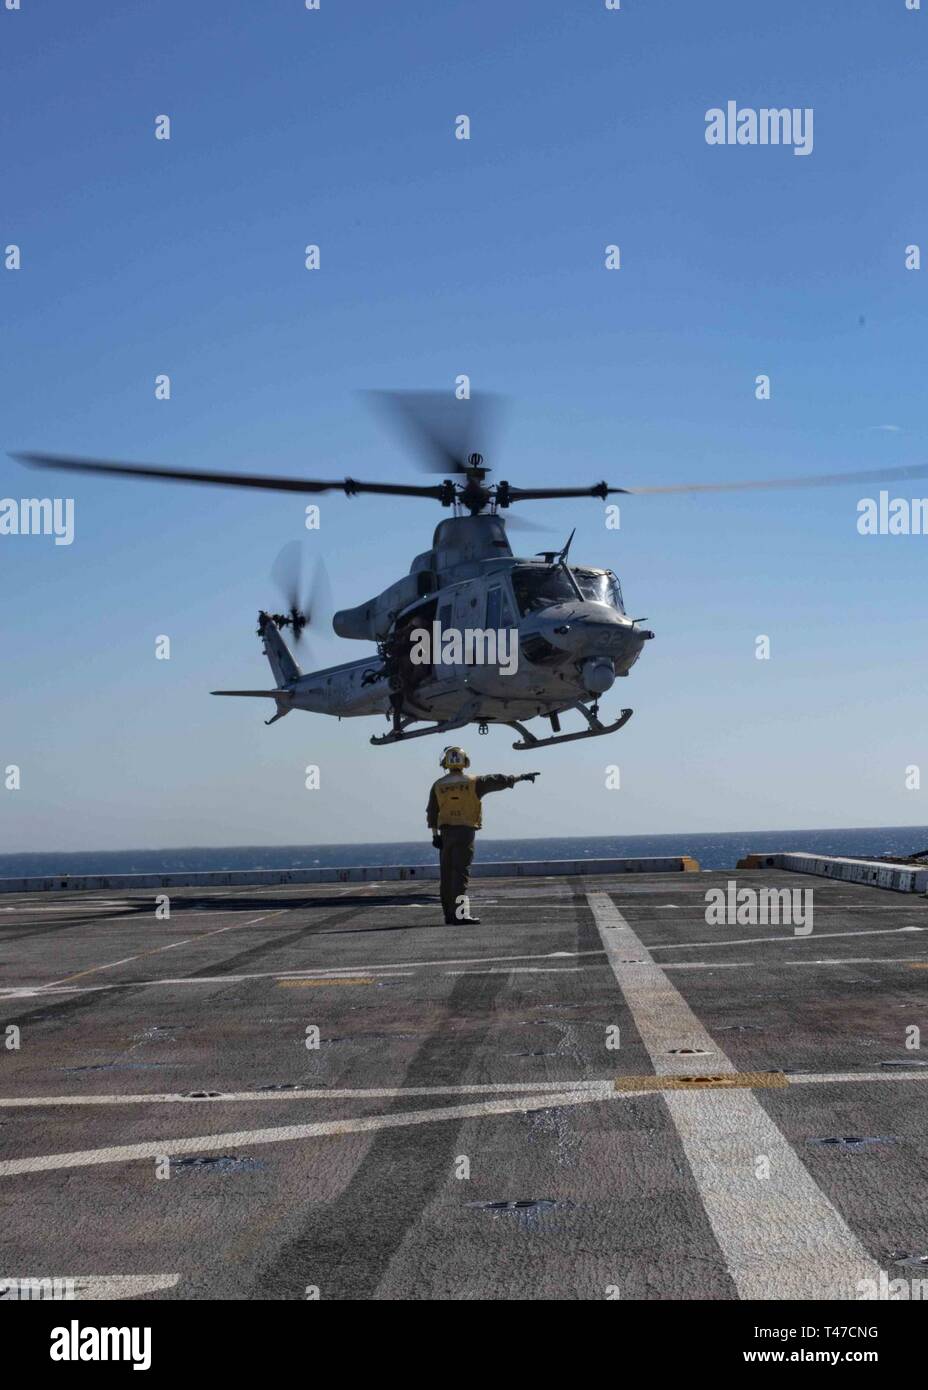 MEDITERRANEAN SEA (Mar. 15, 2019) A UH-1Y Huey helicopter assigned to the “Black Knights” of Marine Medium Tiltrotor Squadron (VMM) 264 (Reinforced) departs the flight deck of the San Antonio-class amphibious transport dock ship USS Arlington (LPD 24), Mar. 15, 2019. Arlington is on a scheduled deployment as part of the Kearsarge Amphibious Ready Group in support of maritime security operations, crisis response and theater security cooperation, while also providing a forward naval presence. Stock Photo